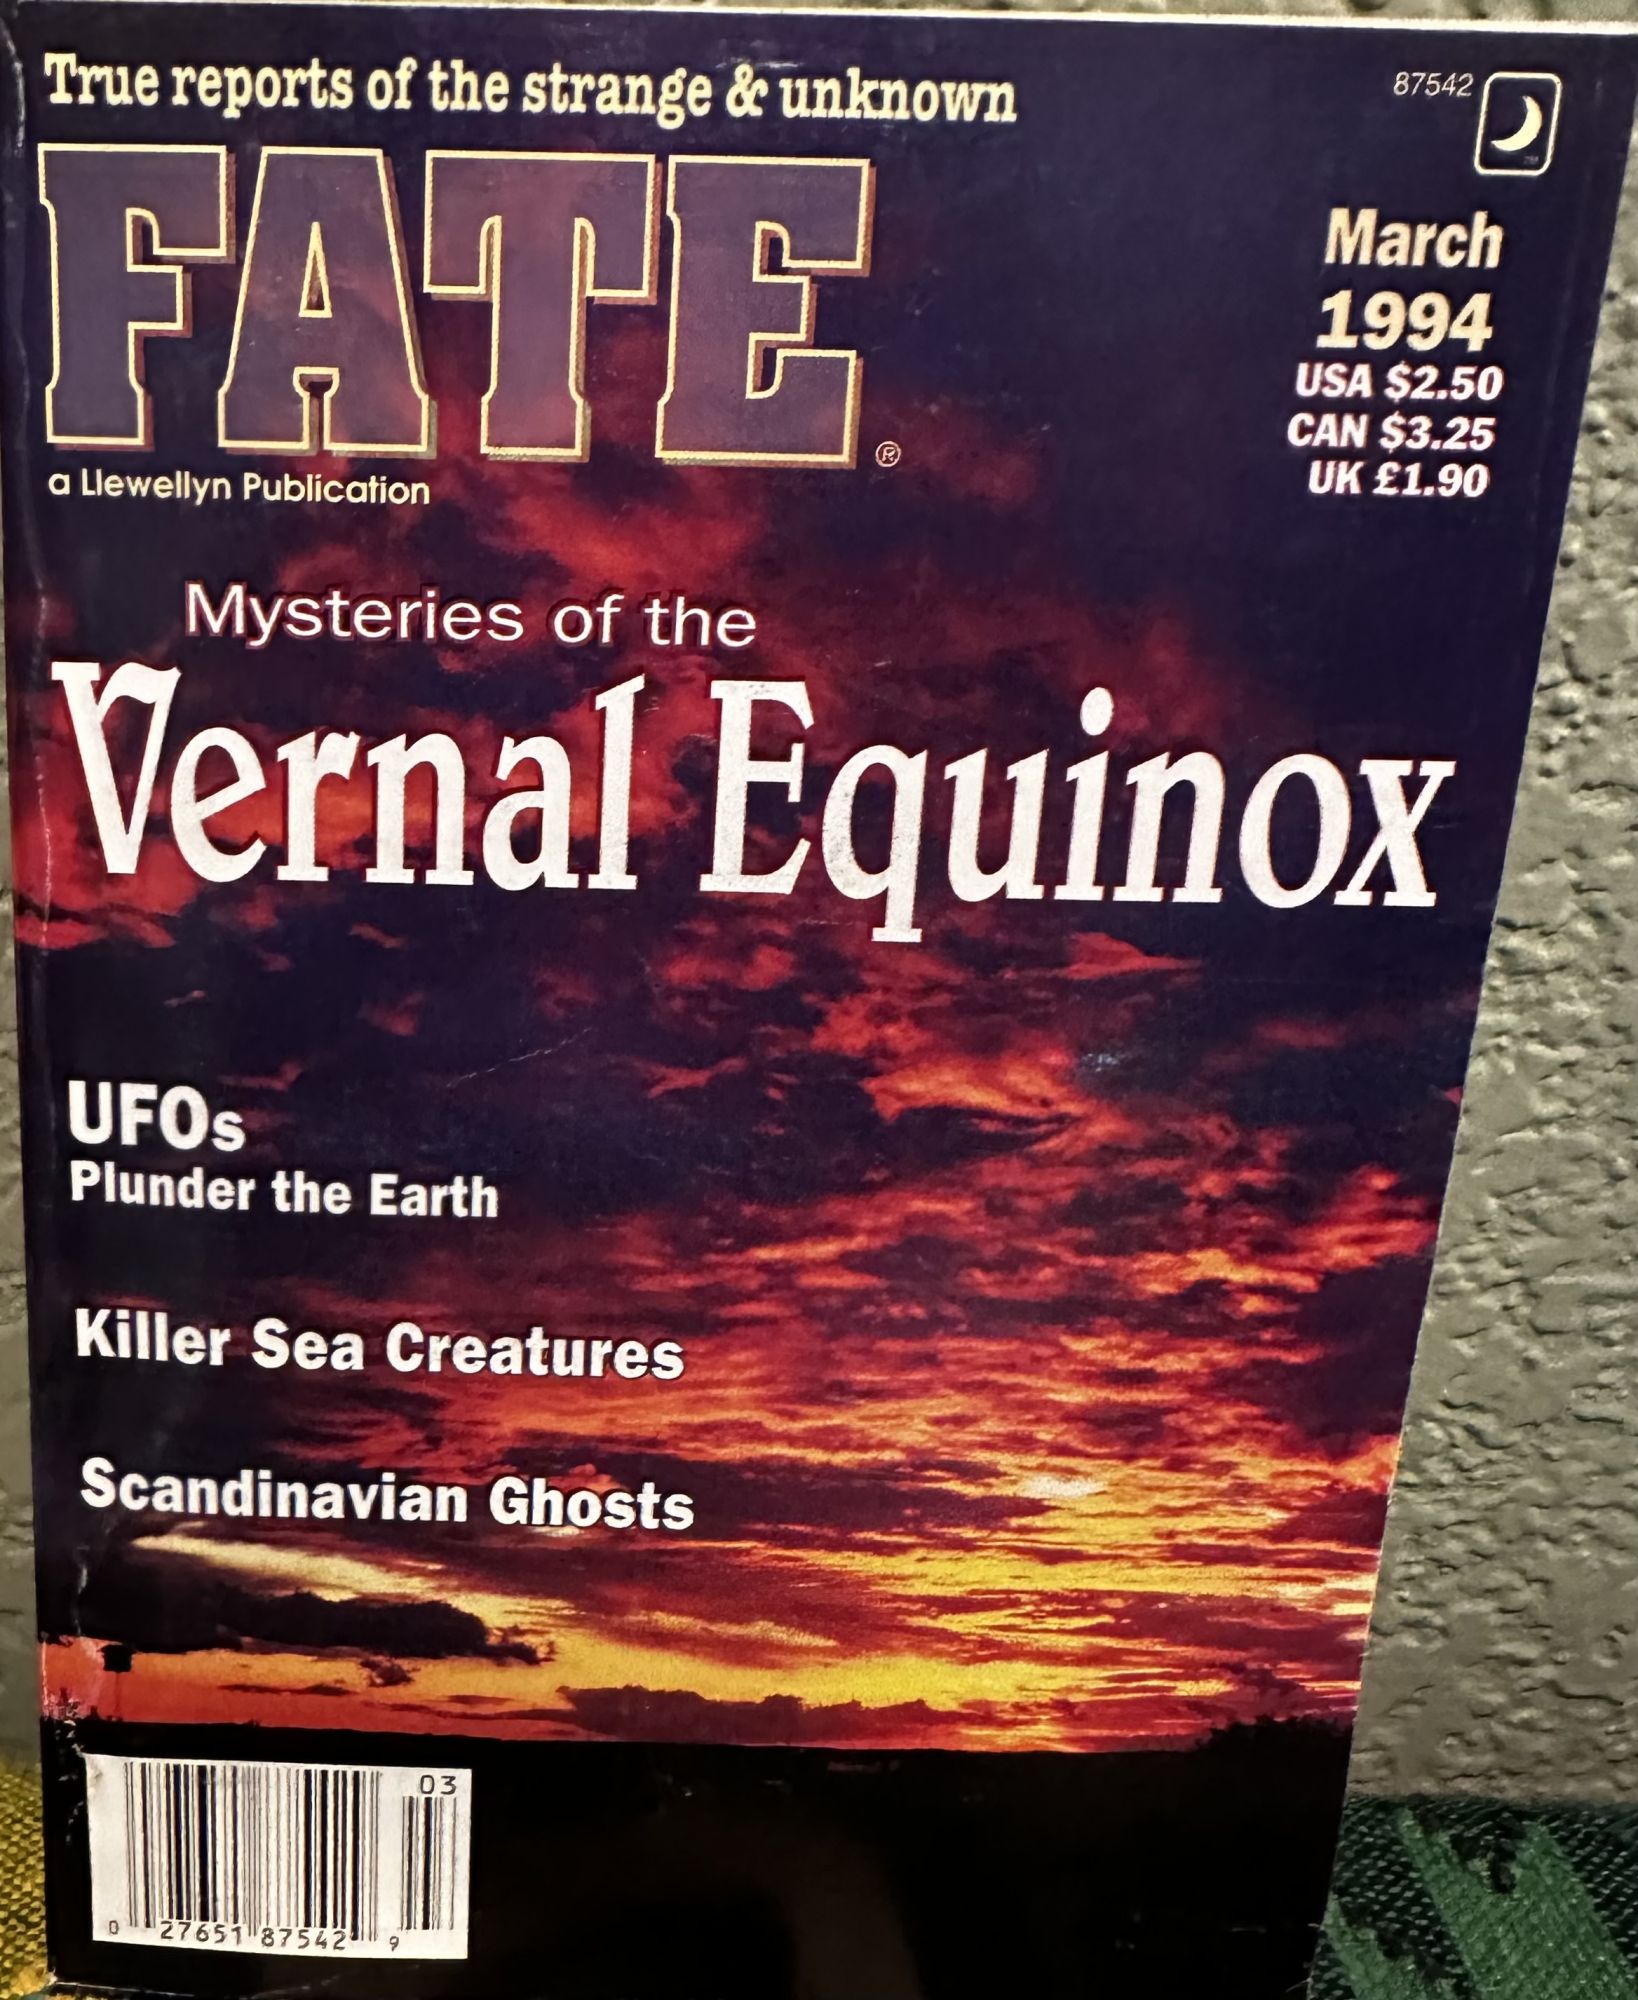 Fate The World's Mysteries Explored March 1994 Vol 47 No 3 Issue 528. Mary Margaret Fuller.